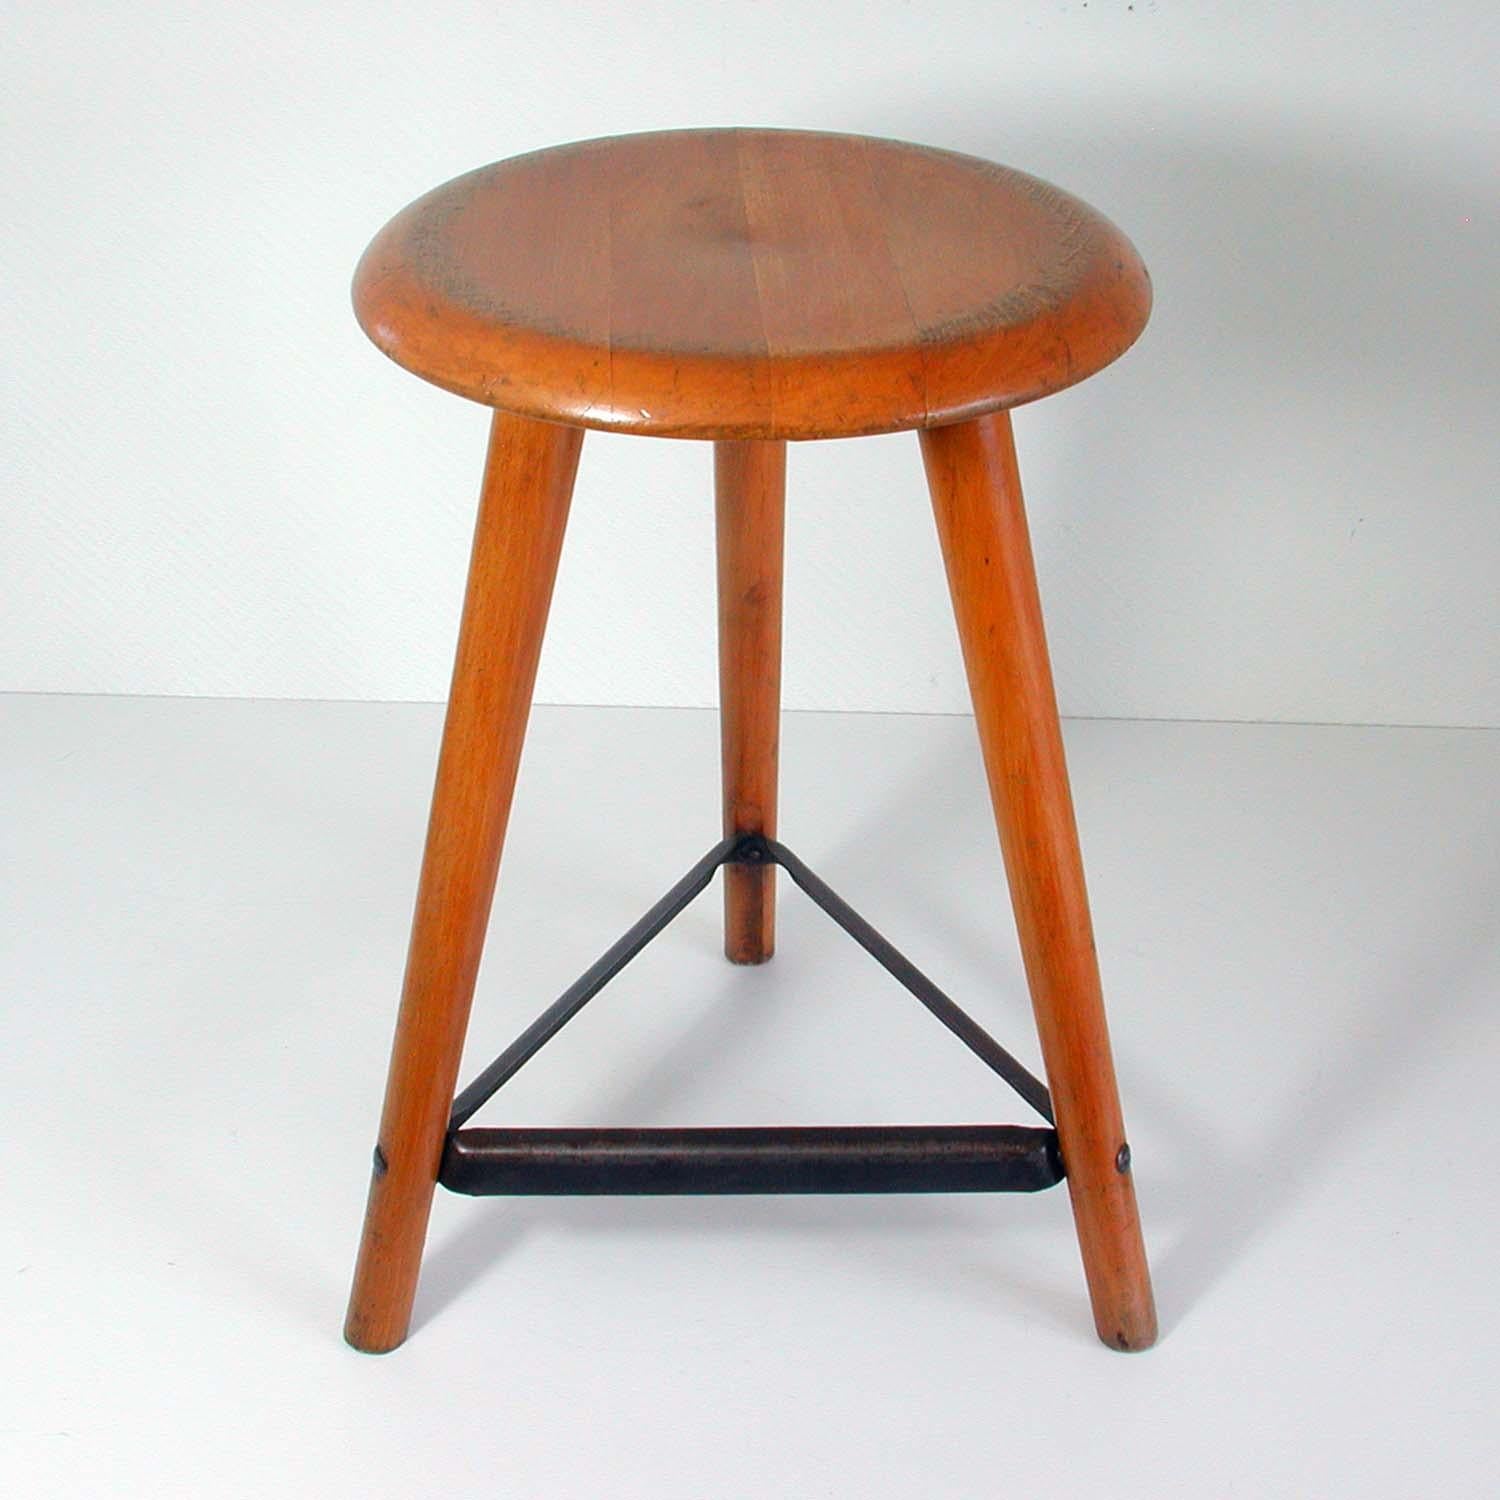 This vintage Industrial work stool was manufactured in Germany in the 1950s by AMA Schemel. It is made of beechwood and iron. The stool has been carefully restored.